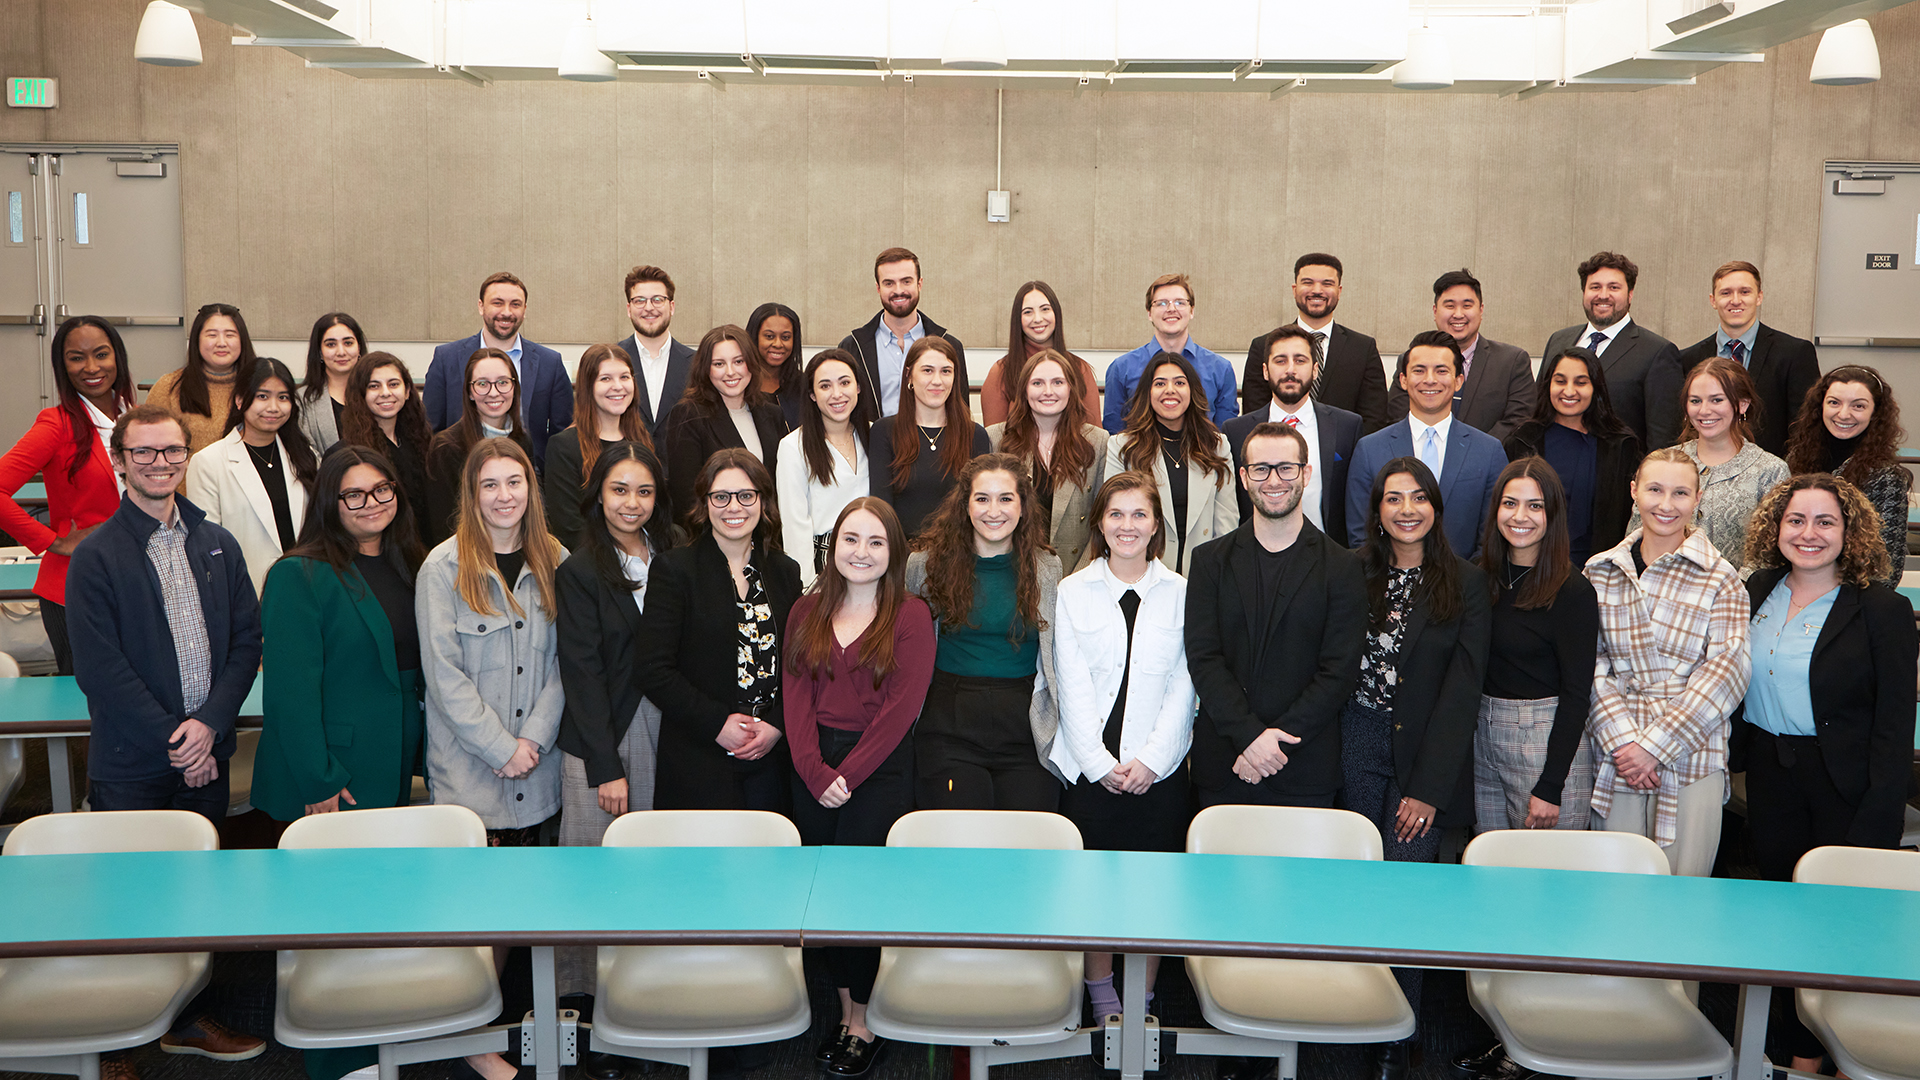 The Loyola of Los Angeles Entertainment Law Review poses for a group photograph in Donovan Hall.